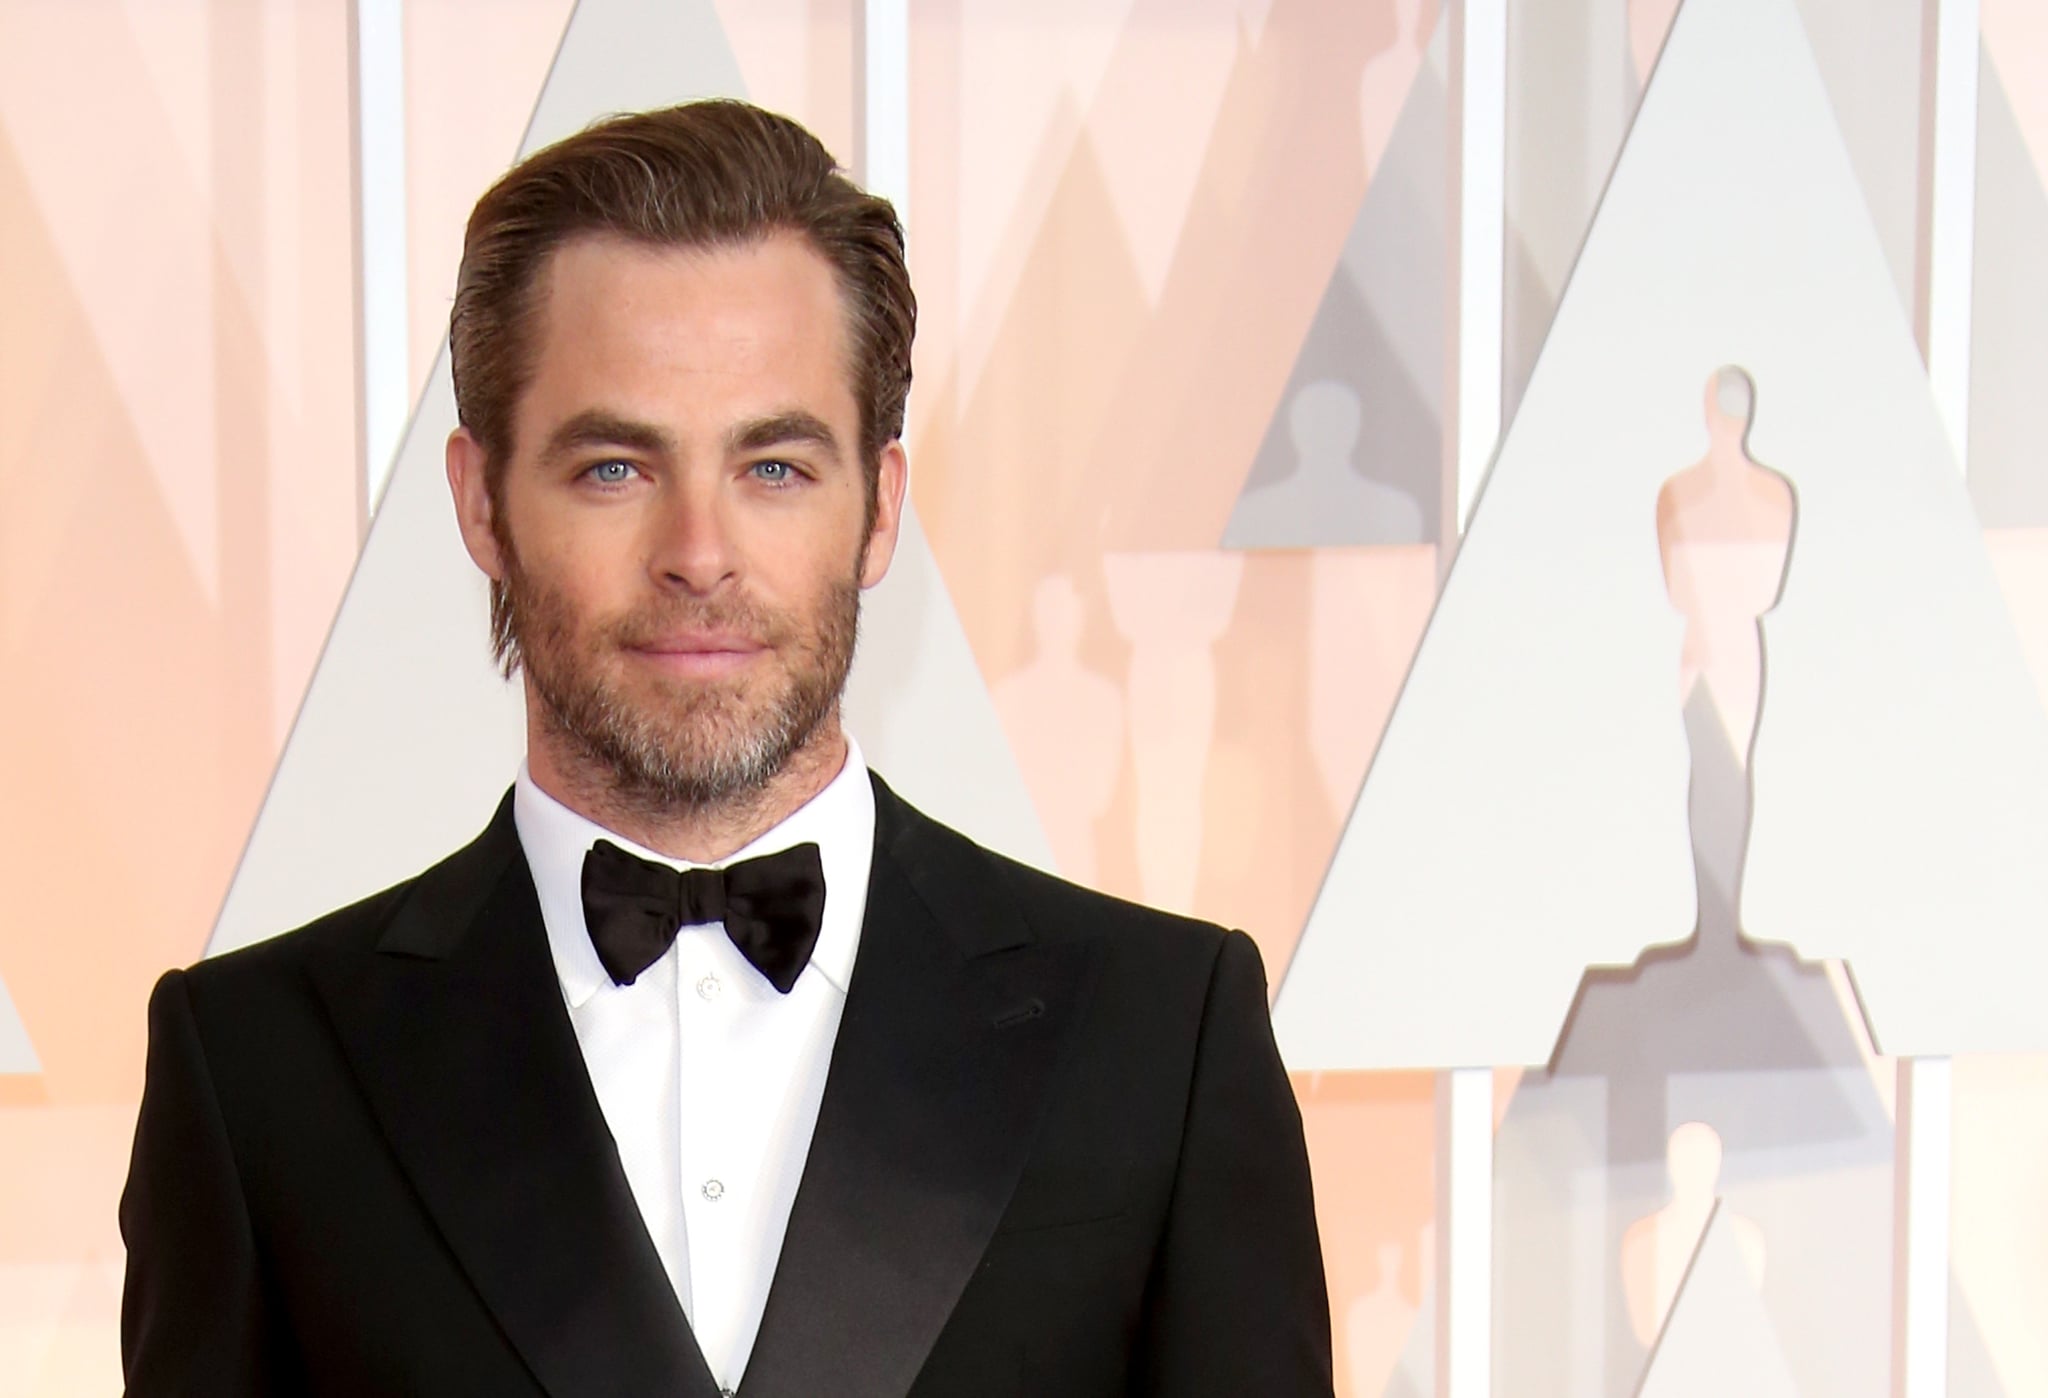 HOLLYWOOD, CA - FEBRUARY 22: Chris Pine arrives at the 87th Annual Academy Awards at Hollywood & Highland centre on February 22, 2015 in Los Angeles, California. (Photo by Dan MacMedan/WireImage)